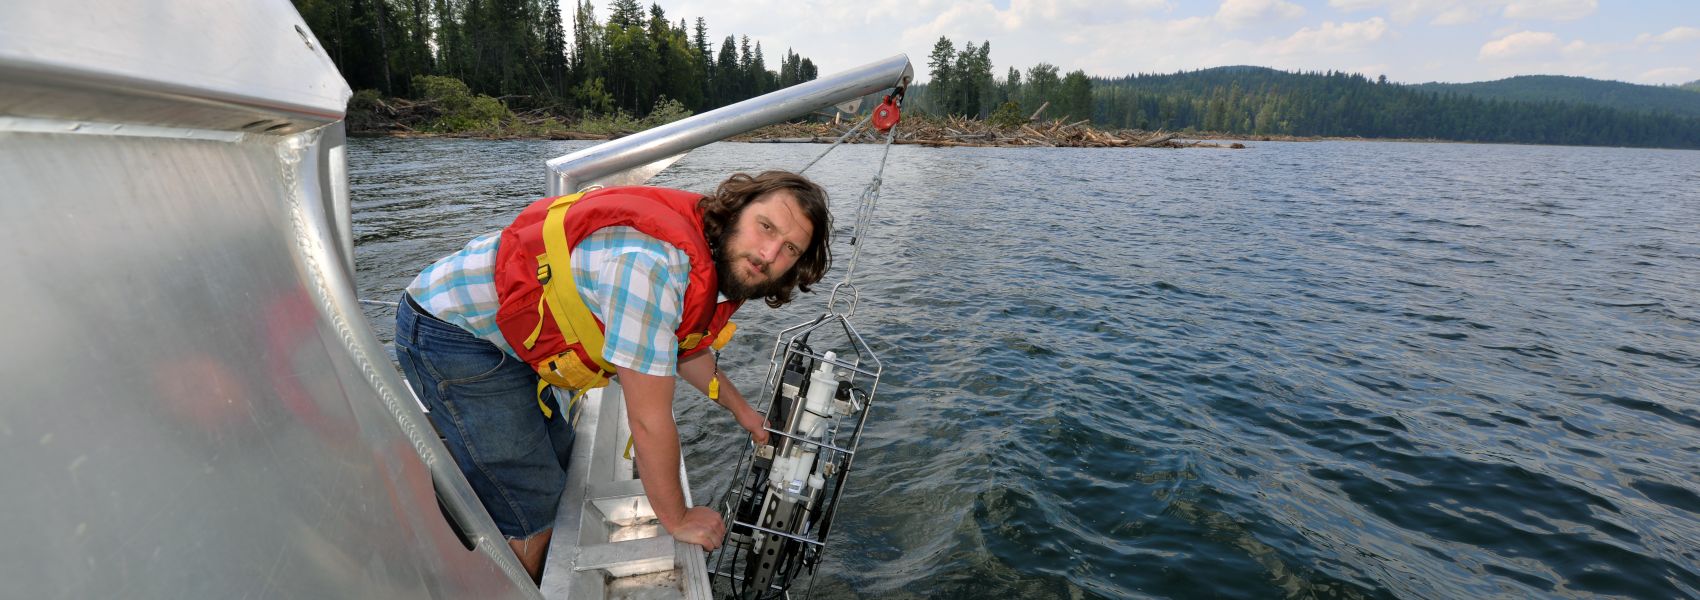 Researchers take water samples on Quesnel Lake, B.C.